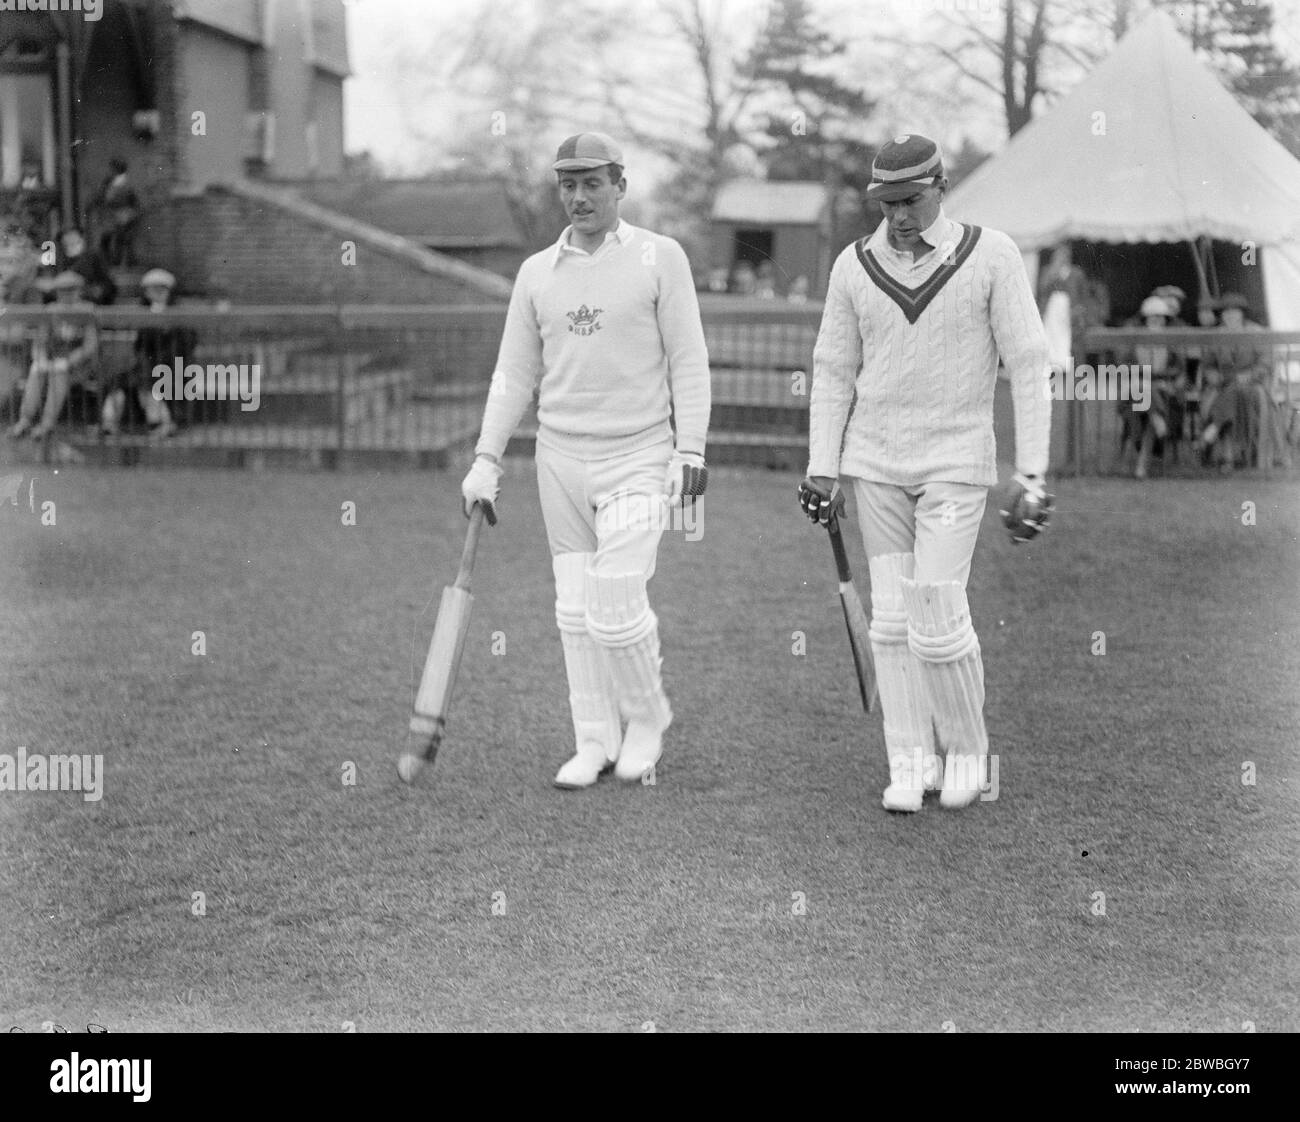 First class cricket season opens . The first class cricket season opened at Oxford on Wednesday with the University commenced a match with Middlesex . K G Blakie ( right ) and H L Price coming out to open the Oxford University innings . 3 May 1922 Stock Photo